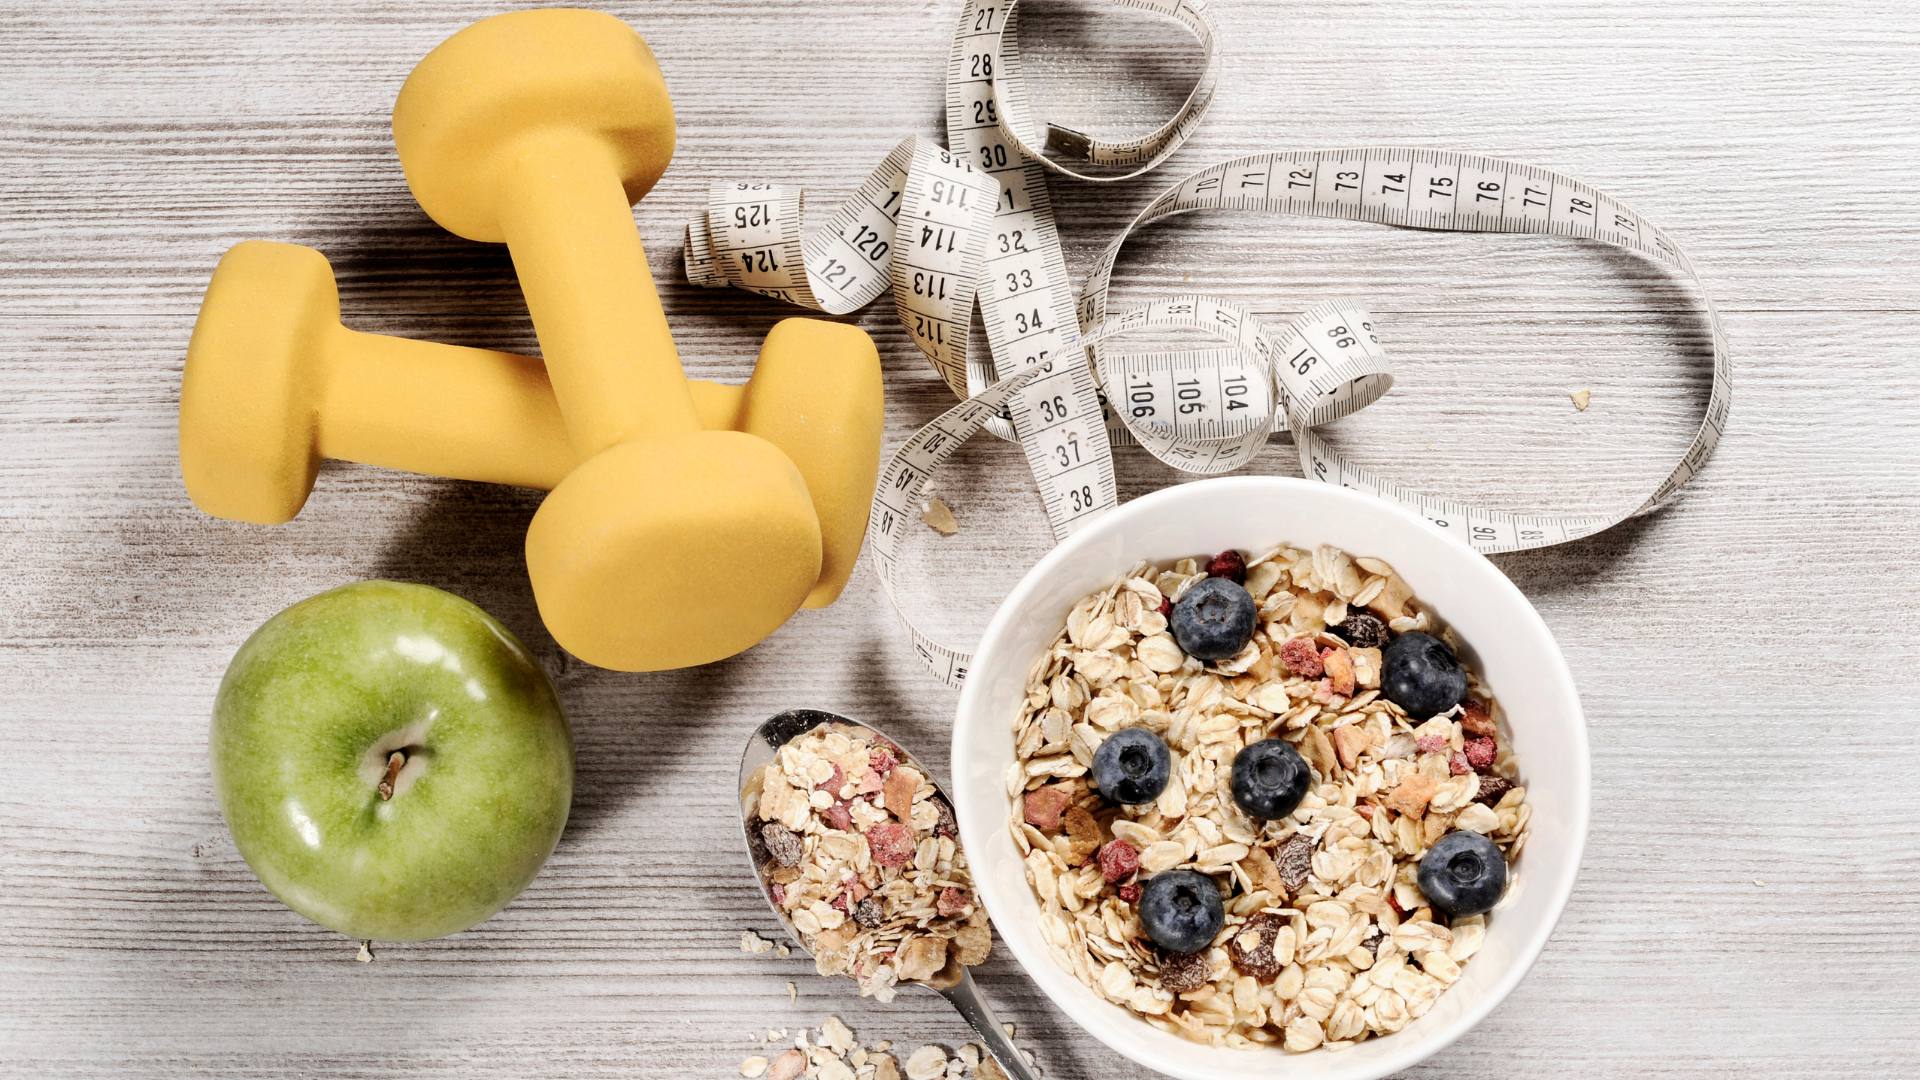 A bowl of cereal is surrounded by an apple, weights, and a measuring tape. This is to demonstrate tips to lose weight.